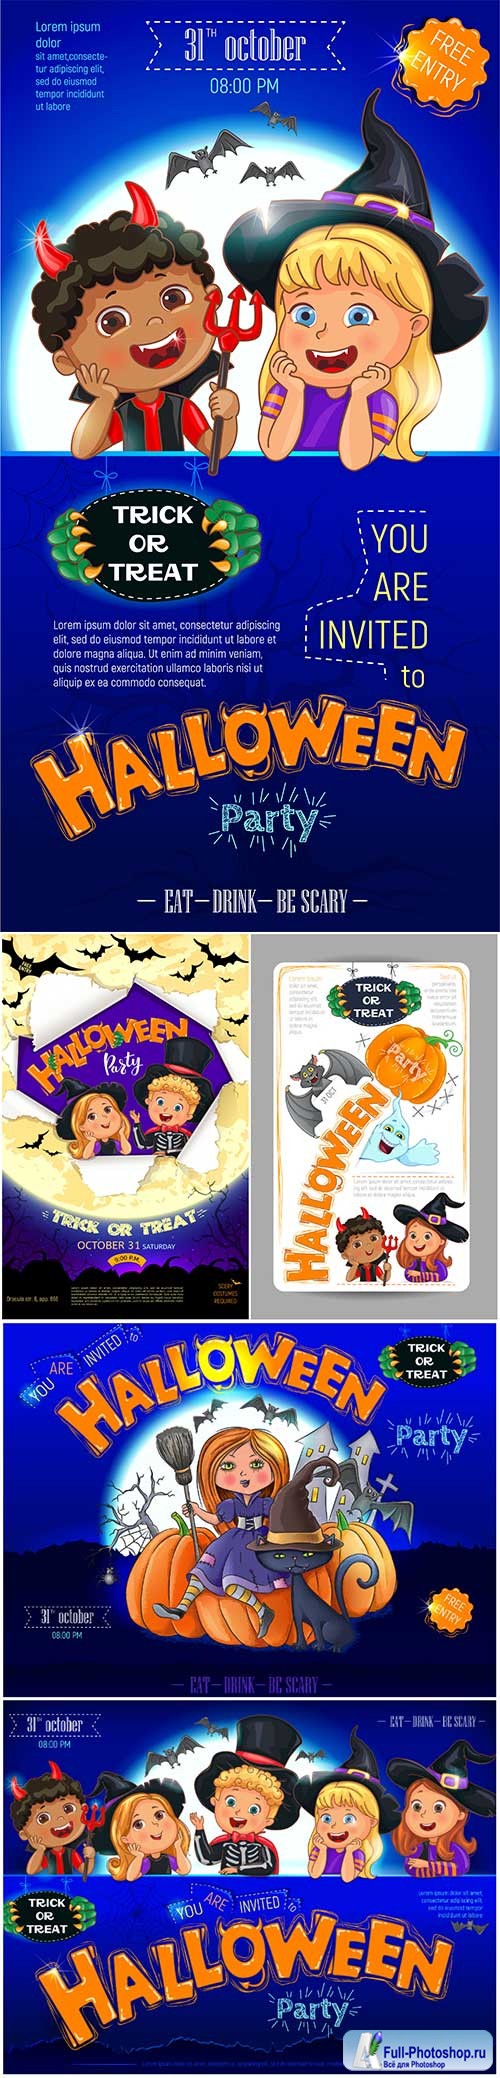 Halloween party design with cute kids invitation flyer